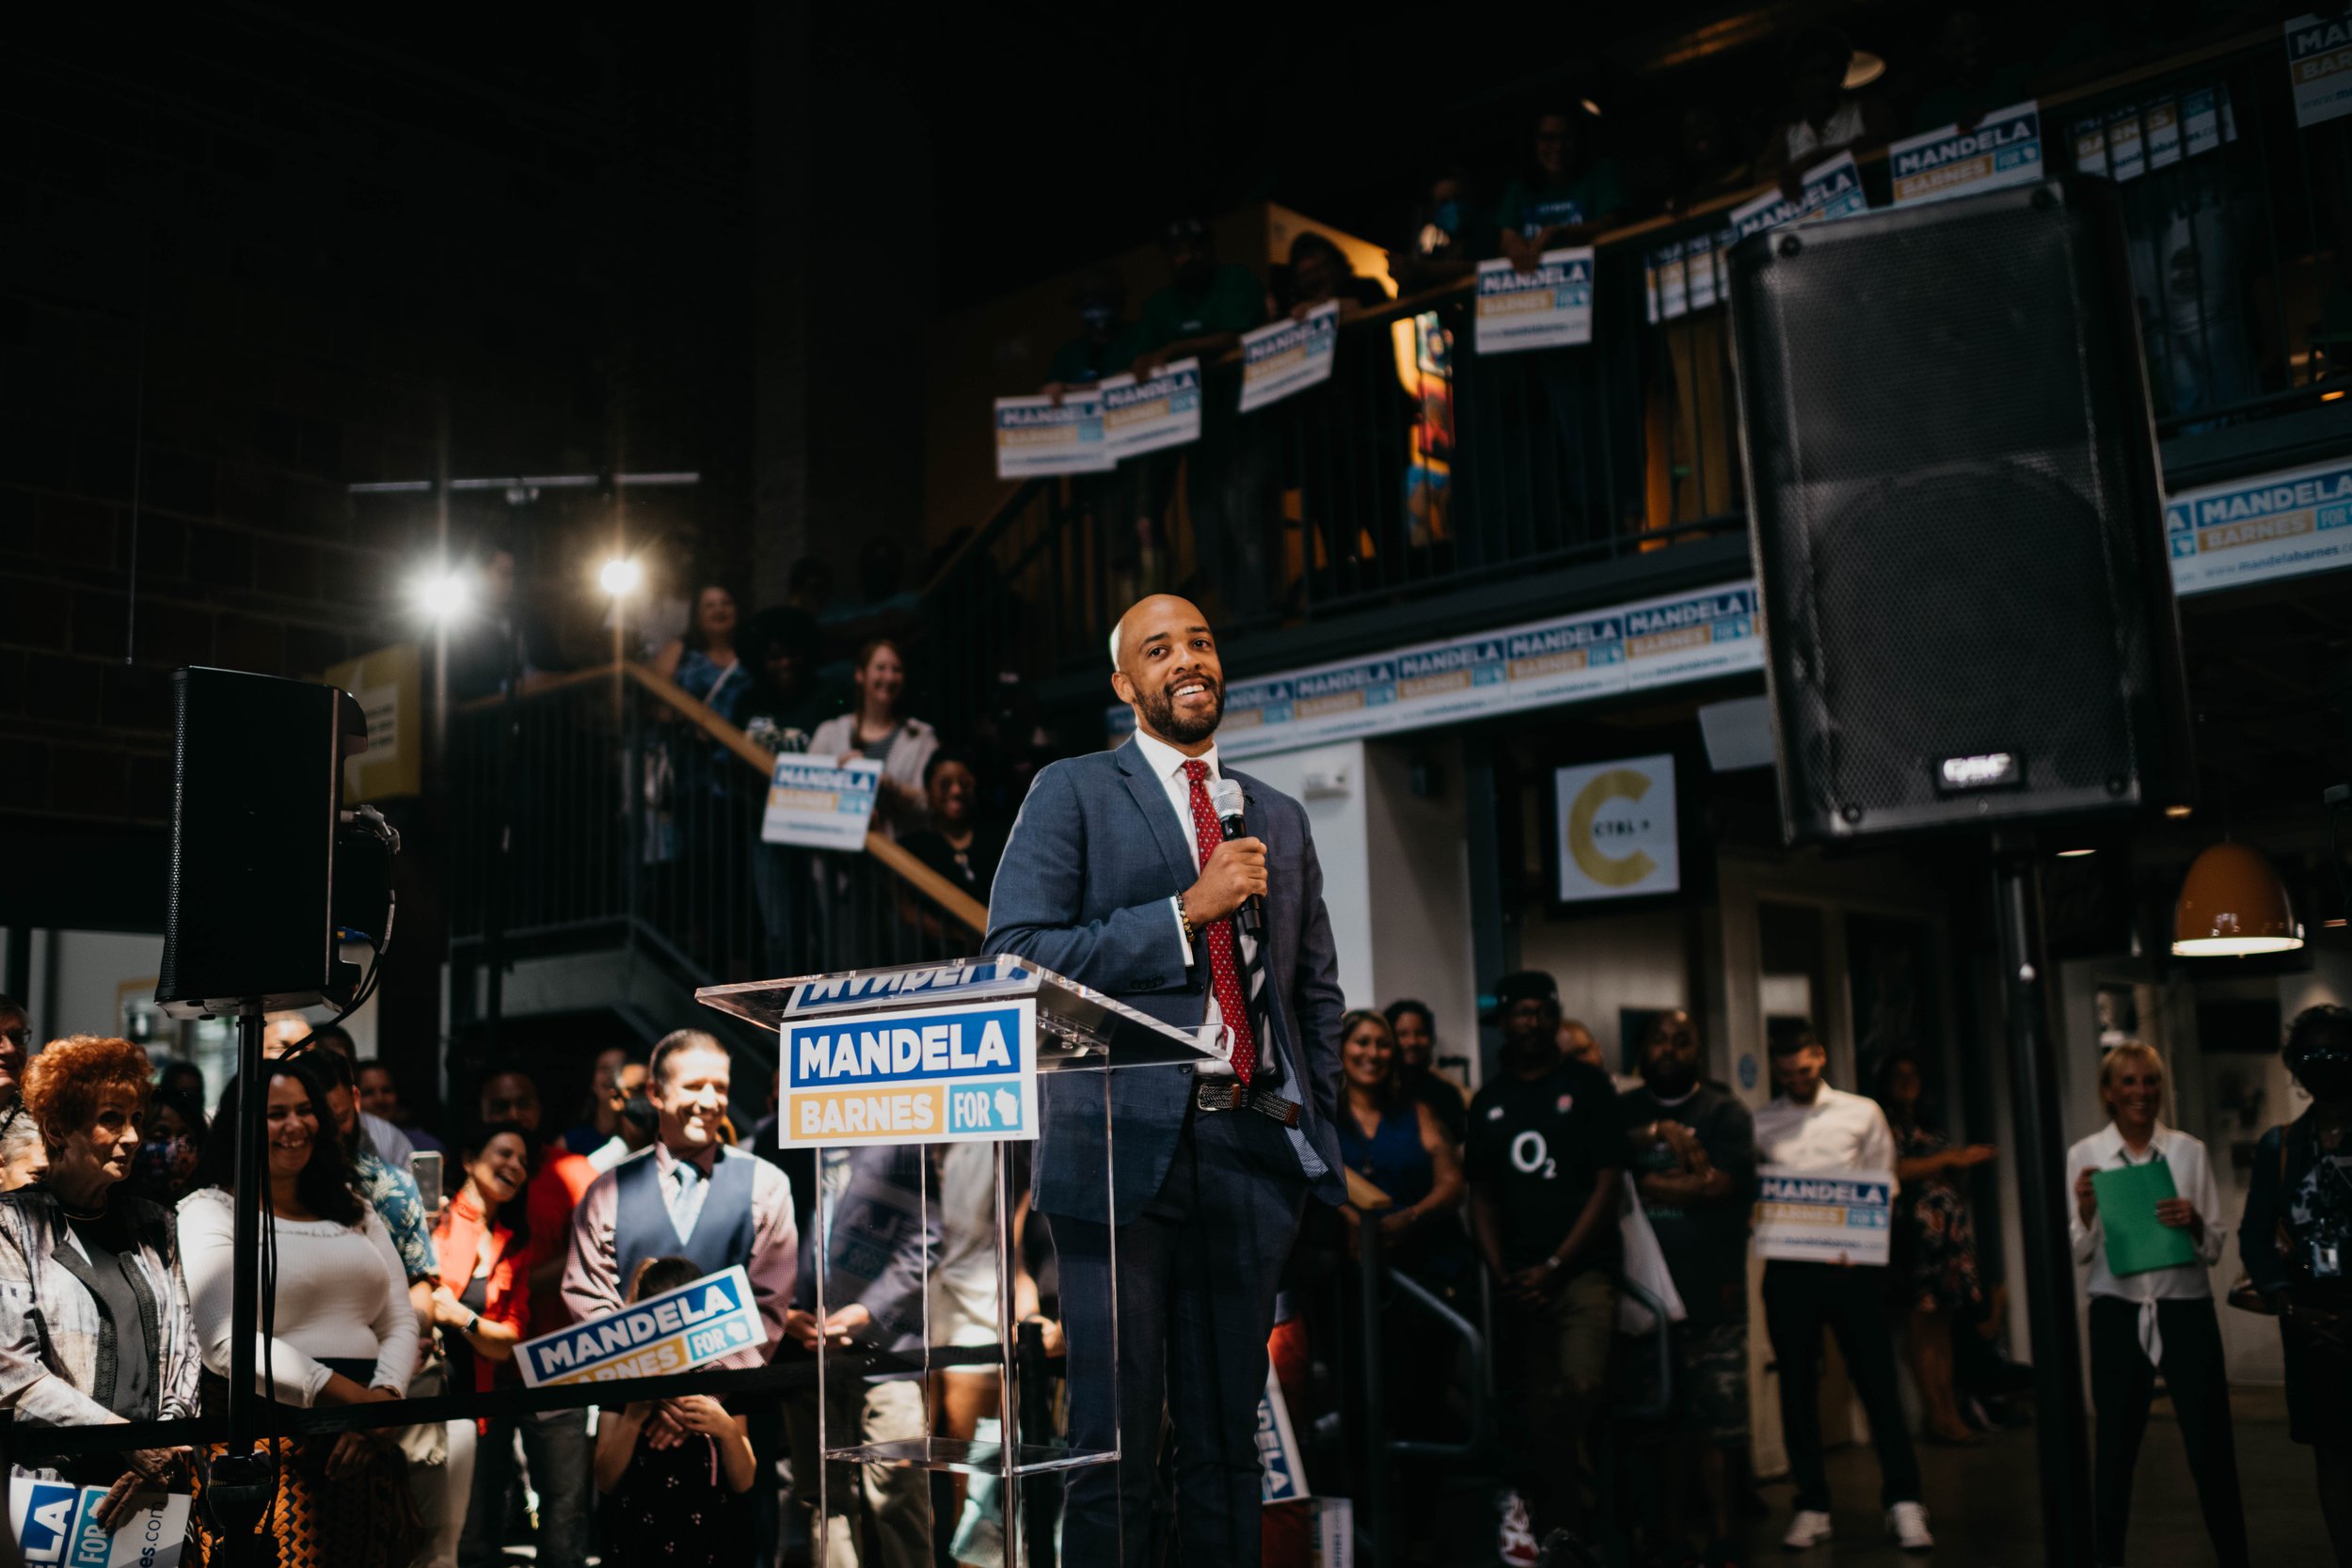 Lt. Governor Mandela Barnes launches his campaign for U.S. Senate in Milwaukee, Wisconsin, 2021